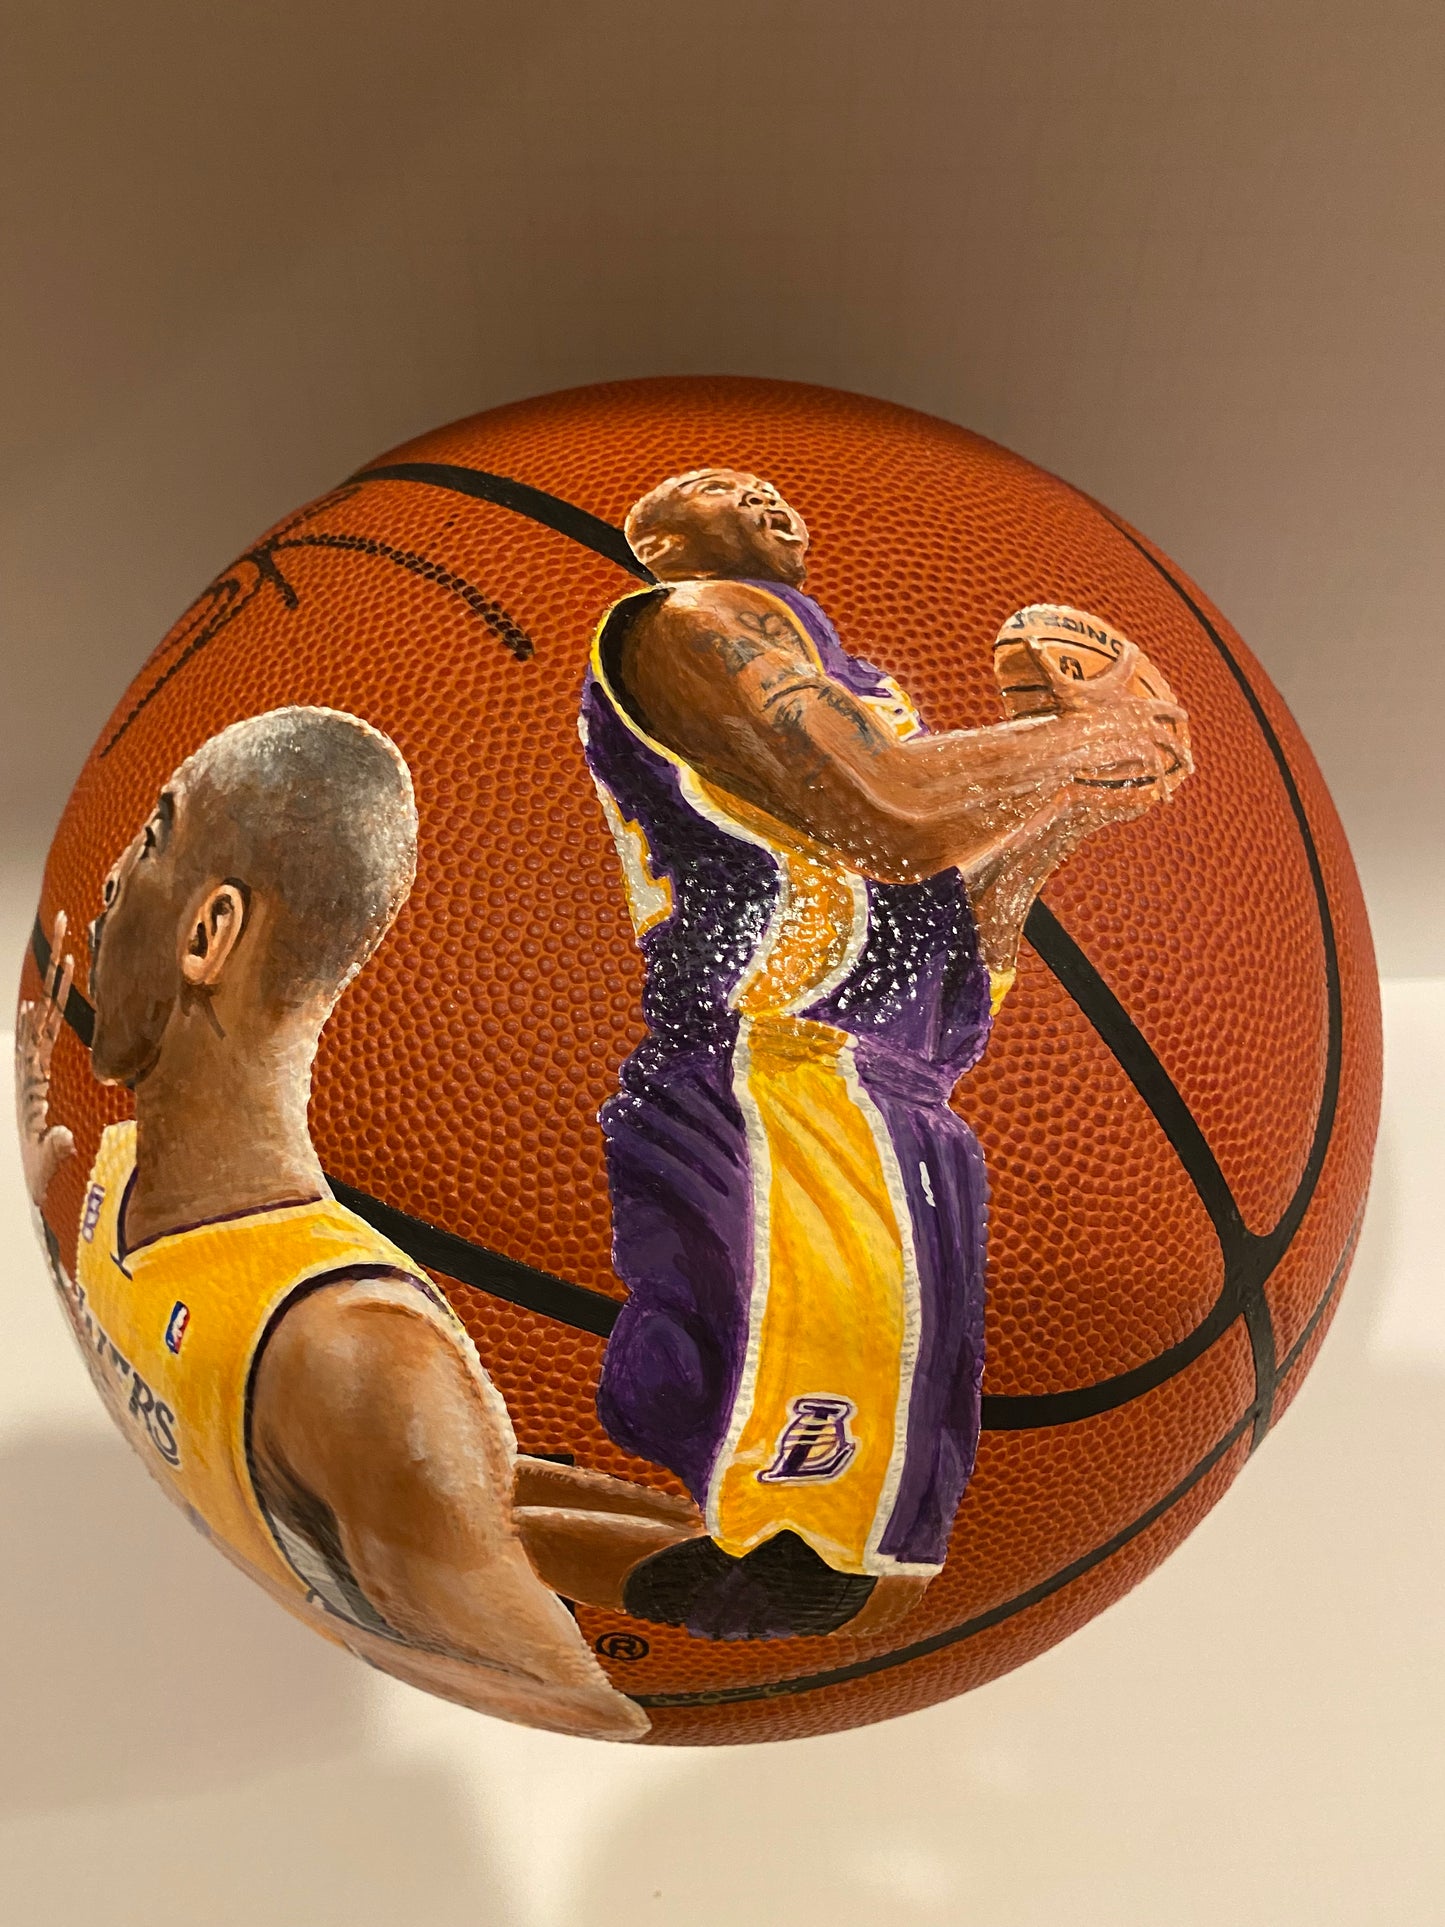 Kobe Bryant Signed Hand Painted By (Only Brushes used) Top Sports Artist Basketball PSA!